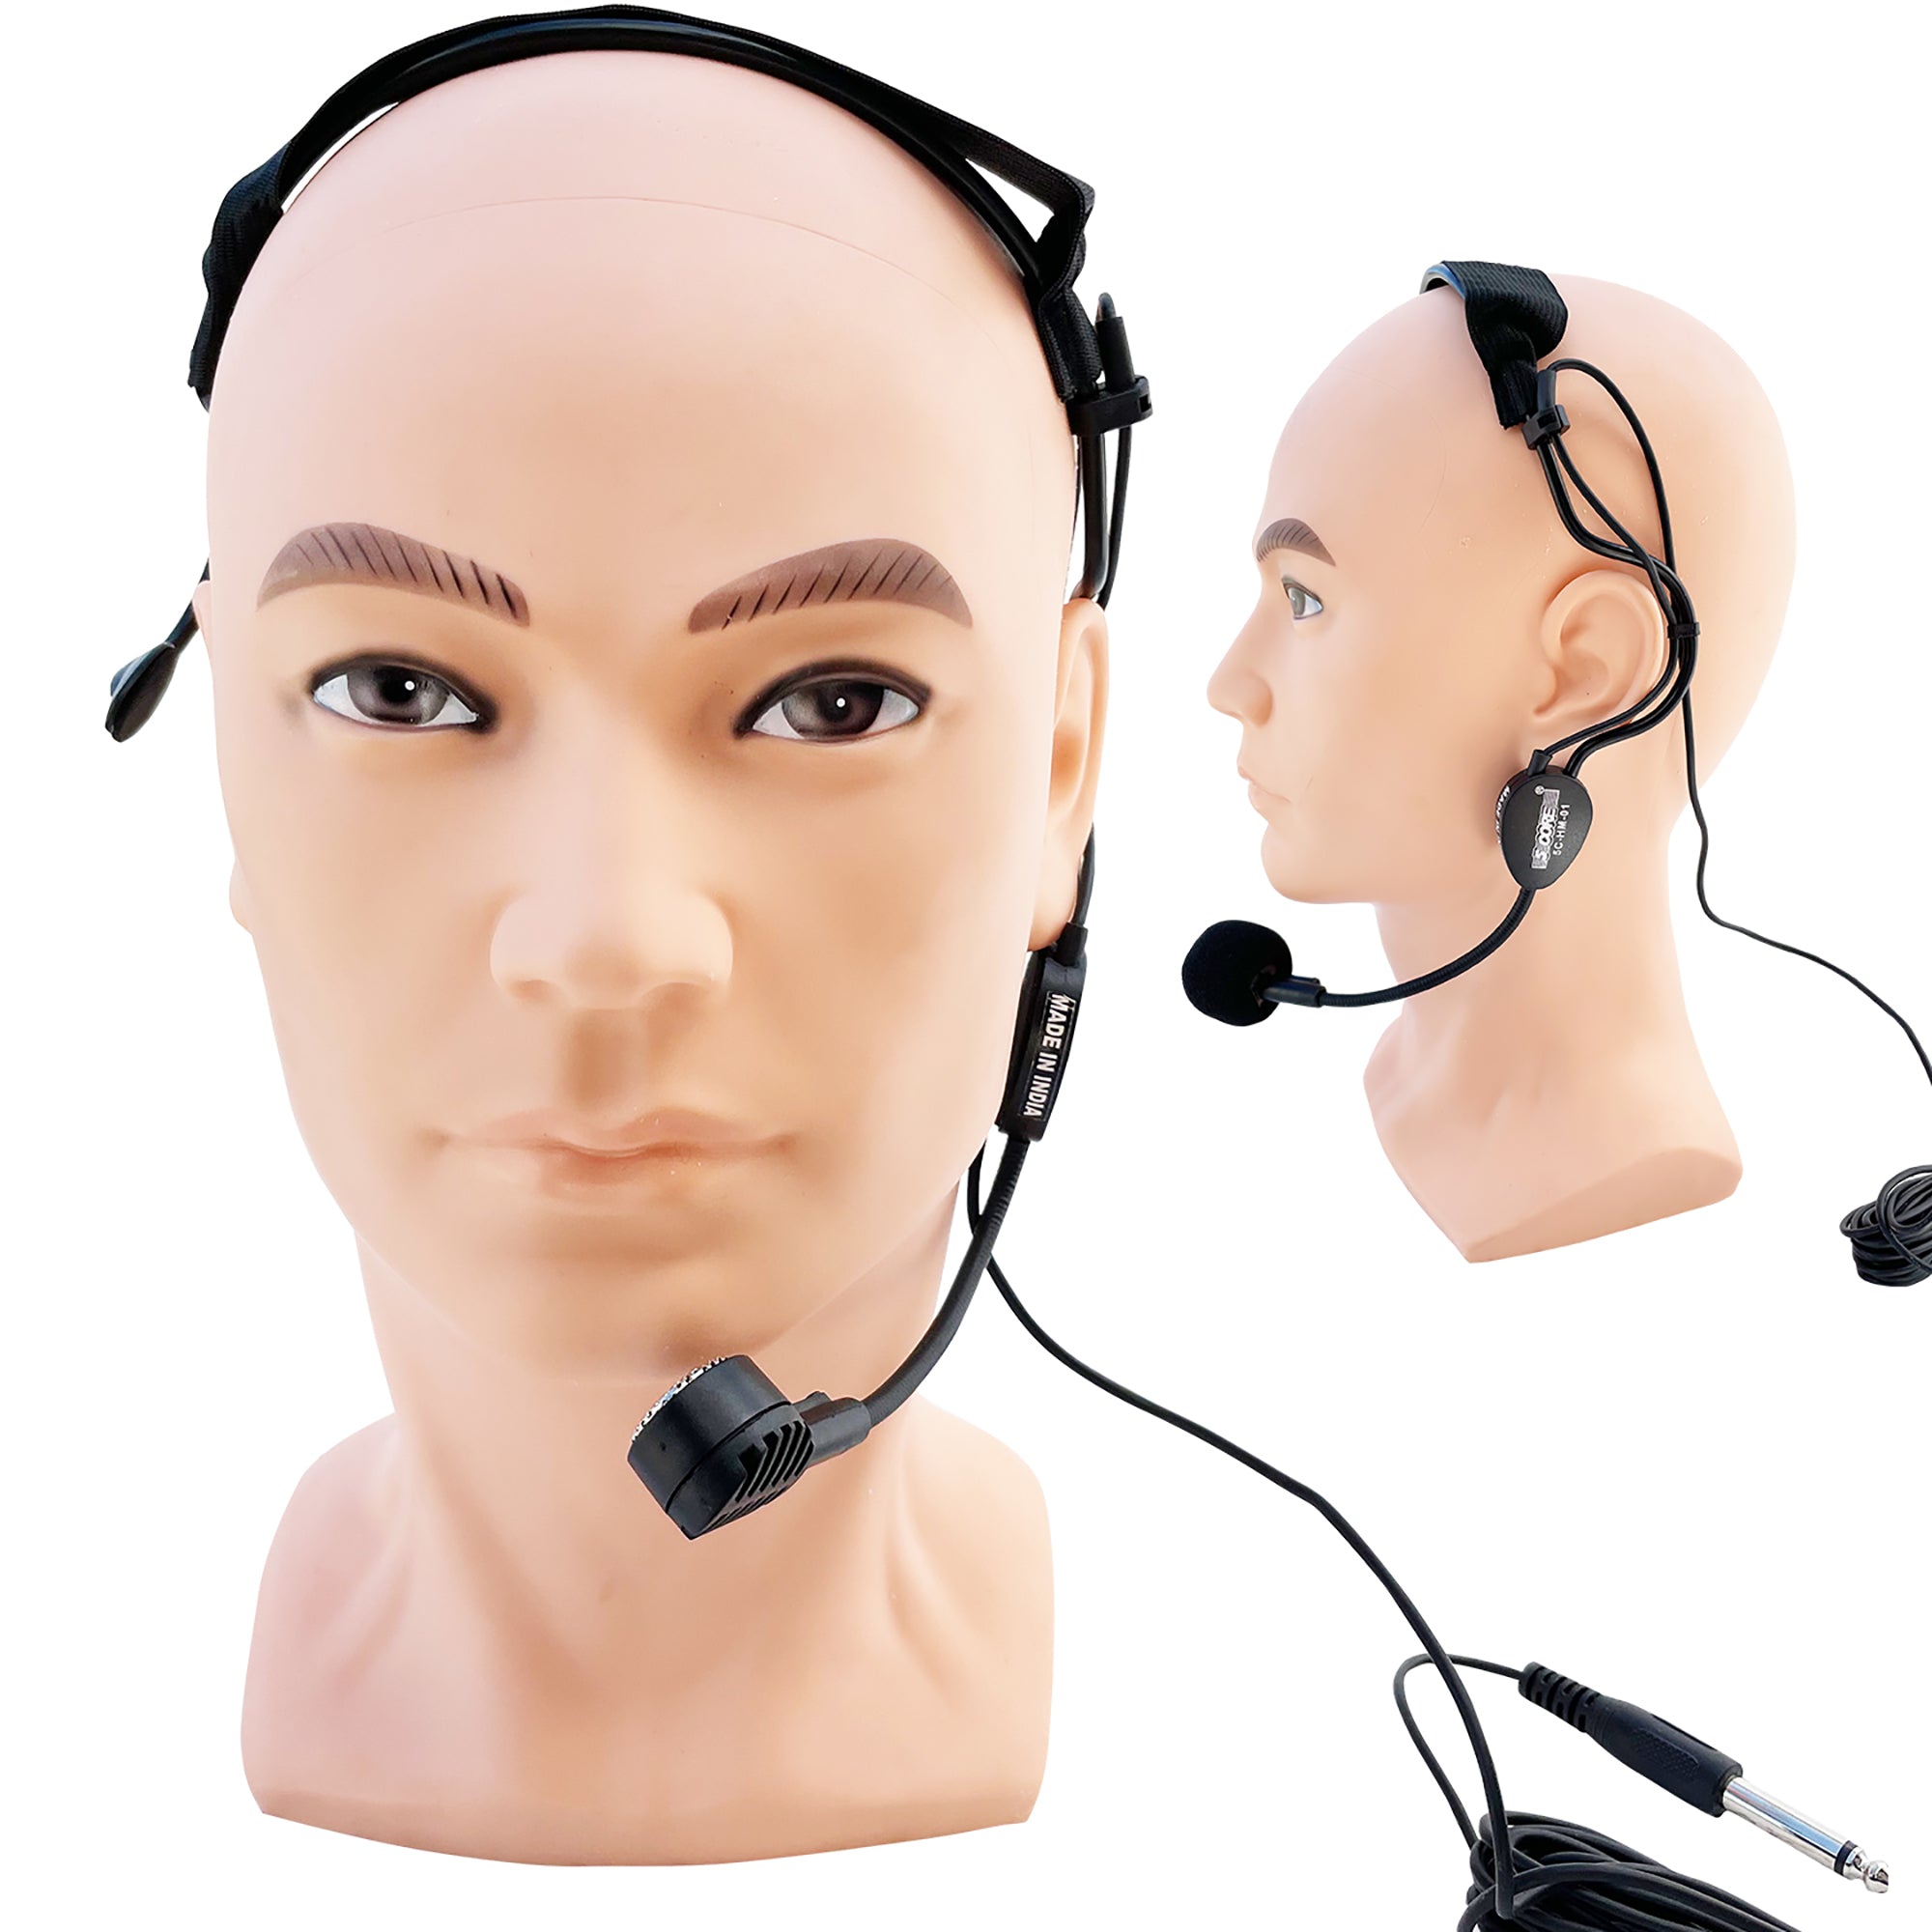 5 Core 3.5mm Wired Headset Microphone Condenser Headworn Microphone Ear Hook and Head Mounted Computer Headset for Business Call Webinar -MIC HM 01